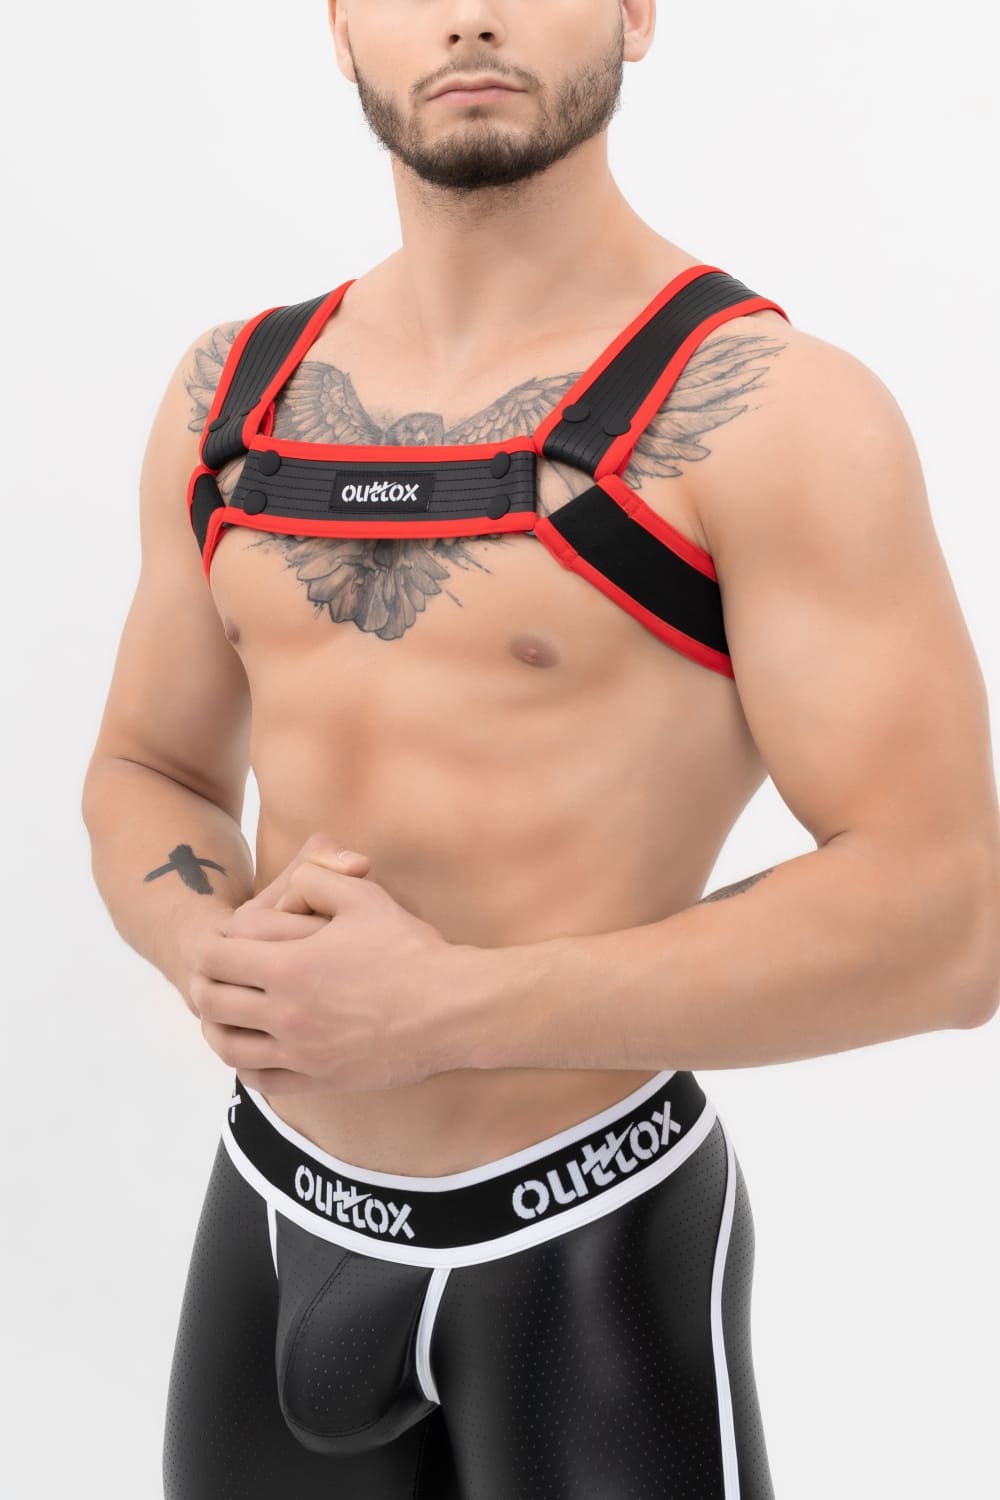 Outtox. Bulldog Harness with Snaps. Black+Red